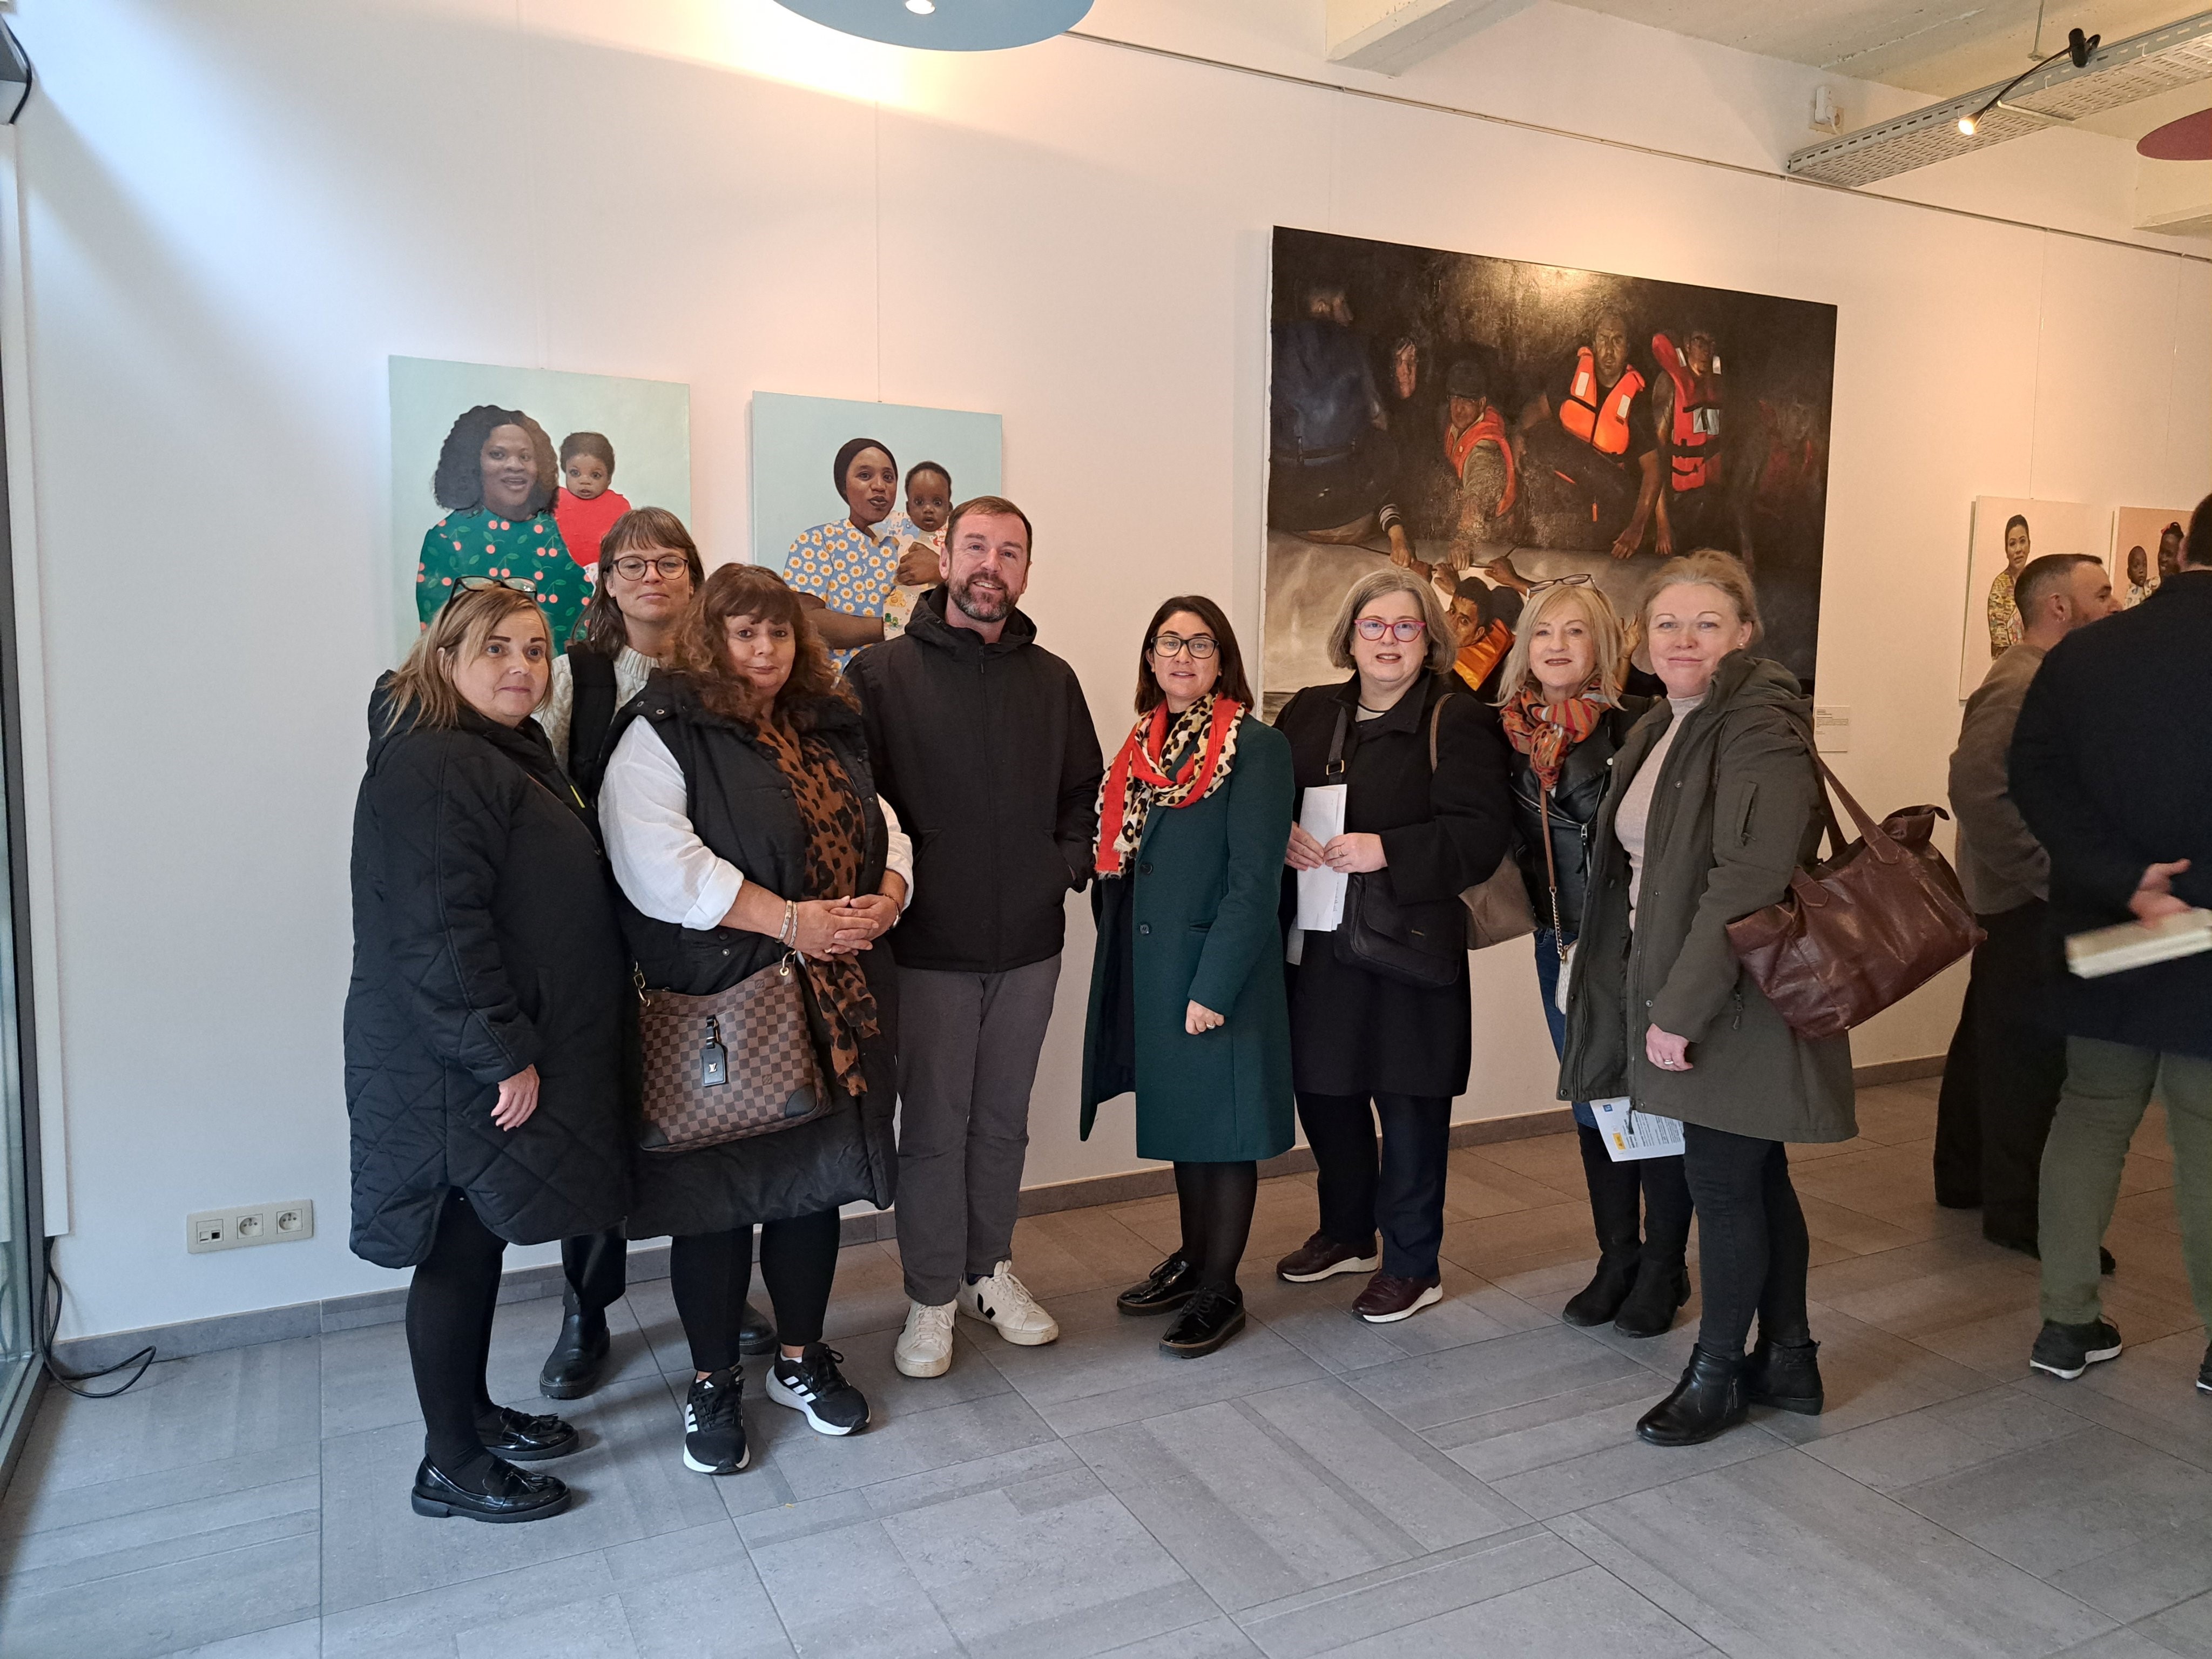 Community education network members stand together at art exhibition